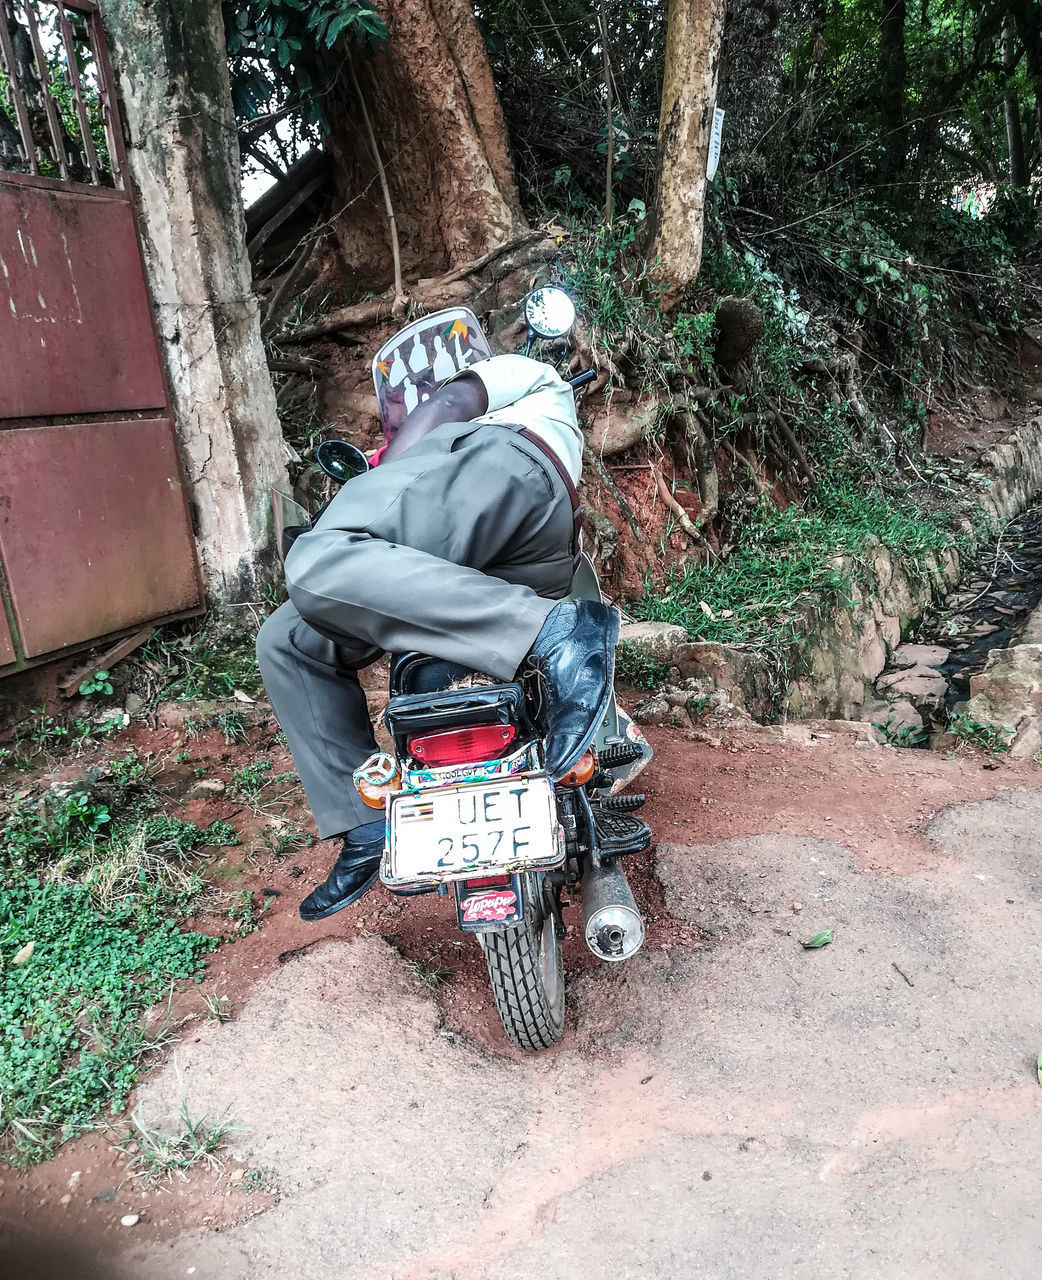 REAR VIEW OF MAN RIDING MOTORCYCLE